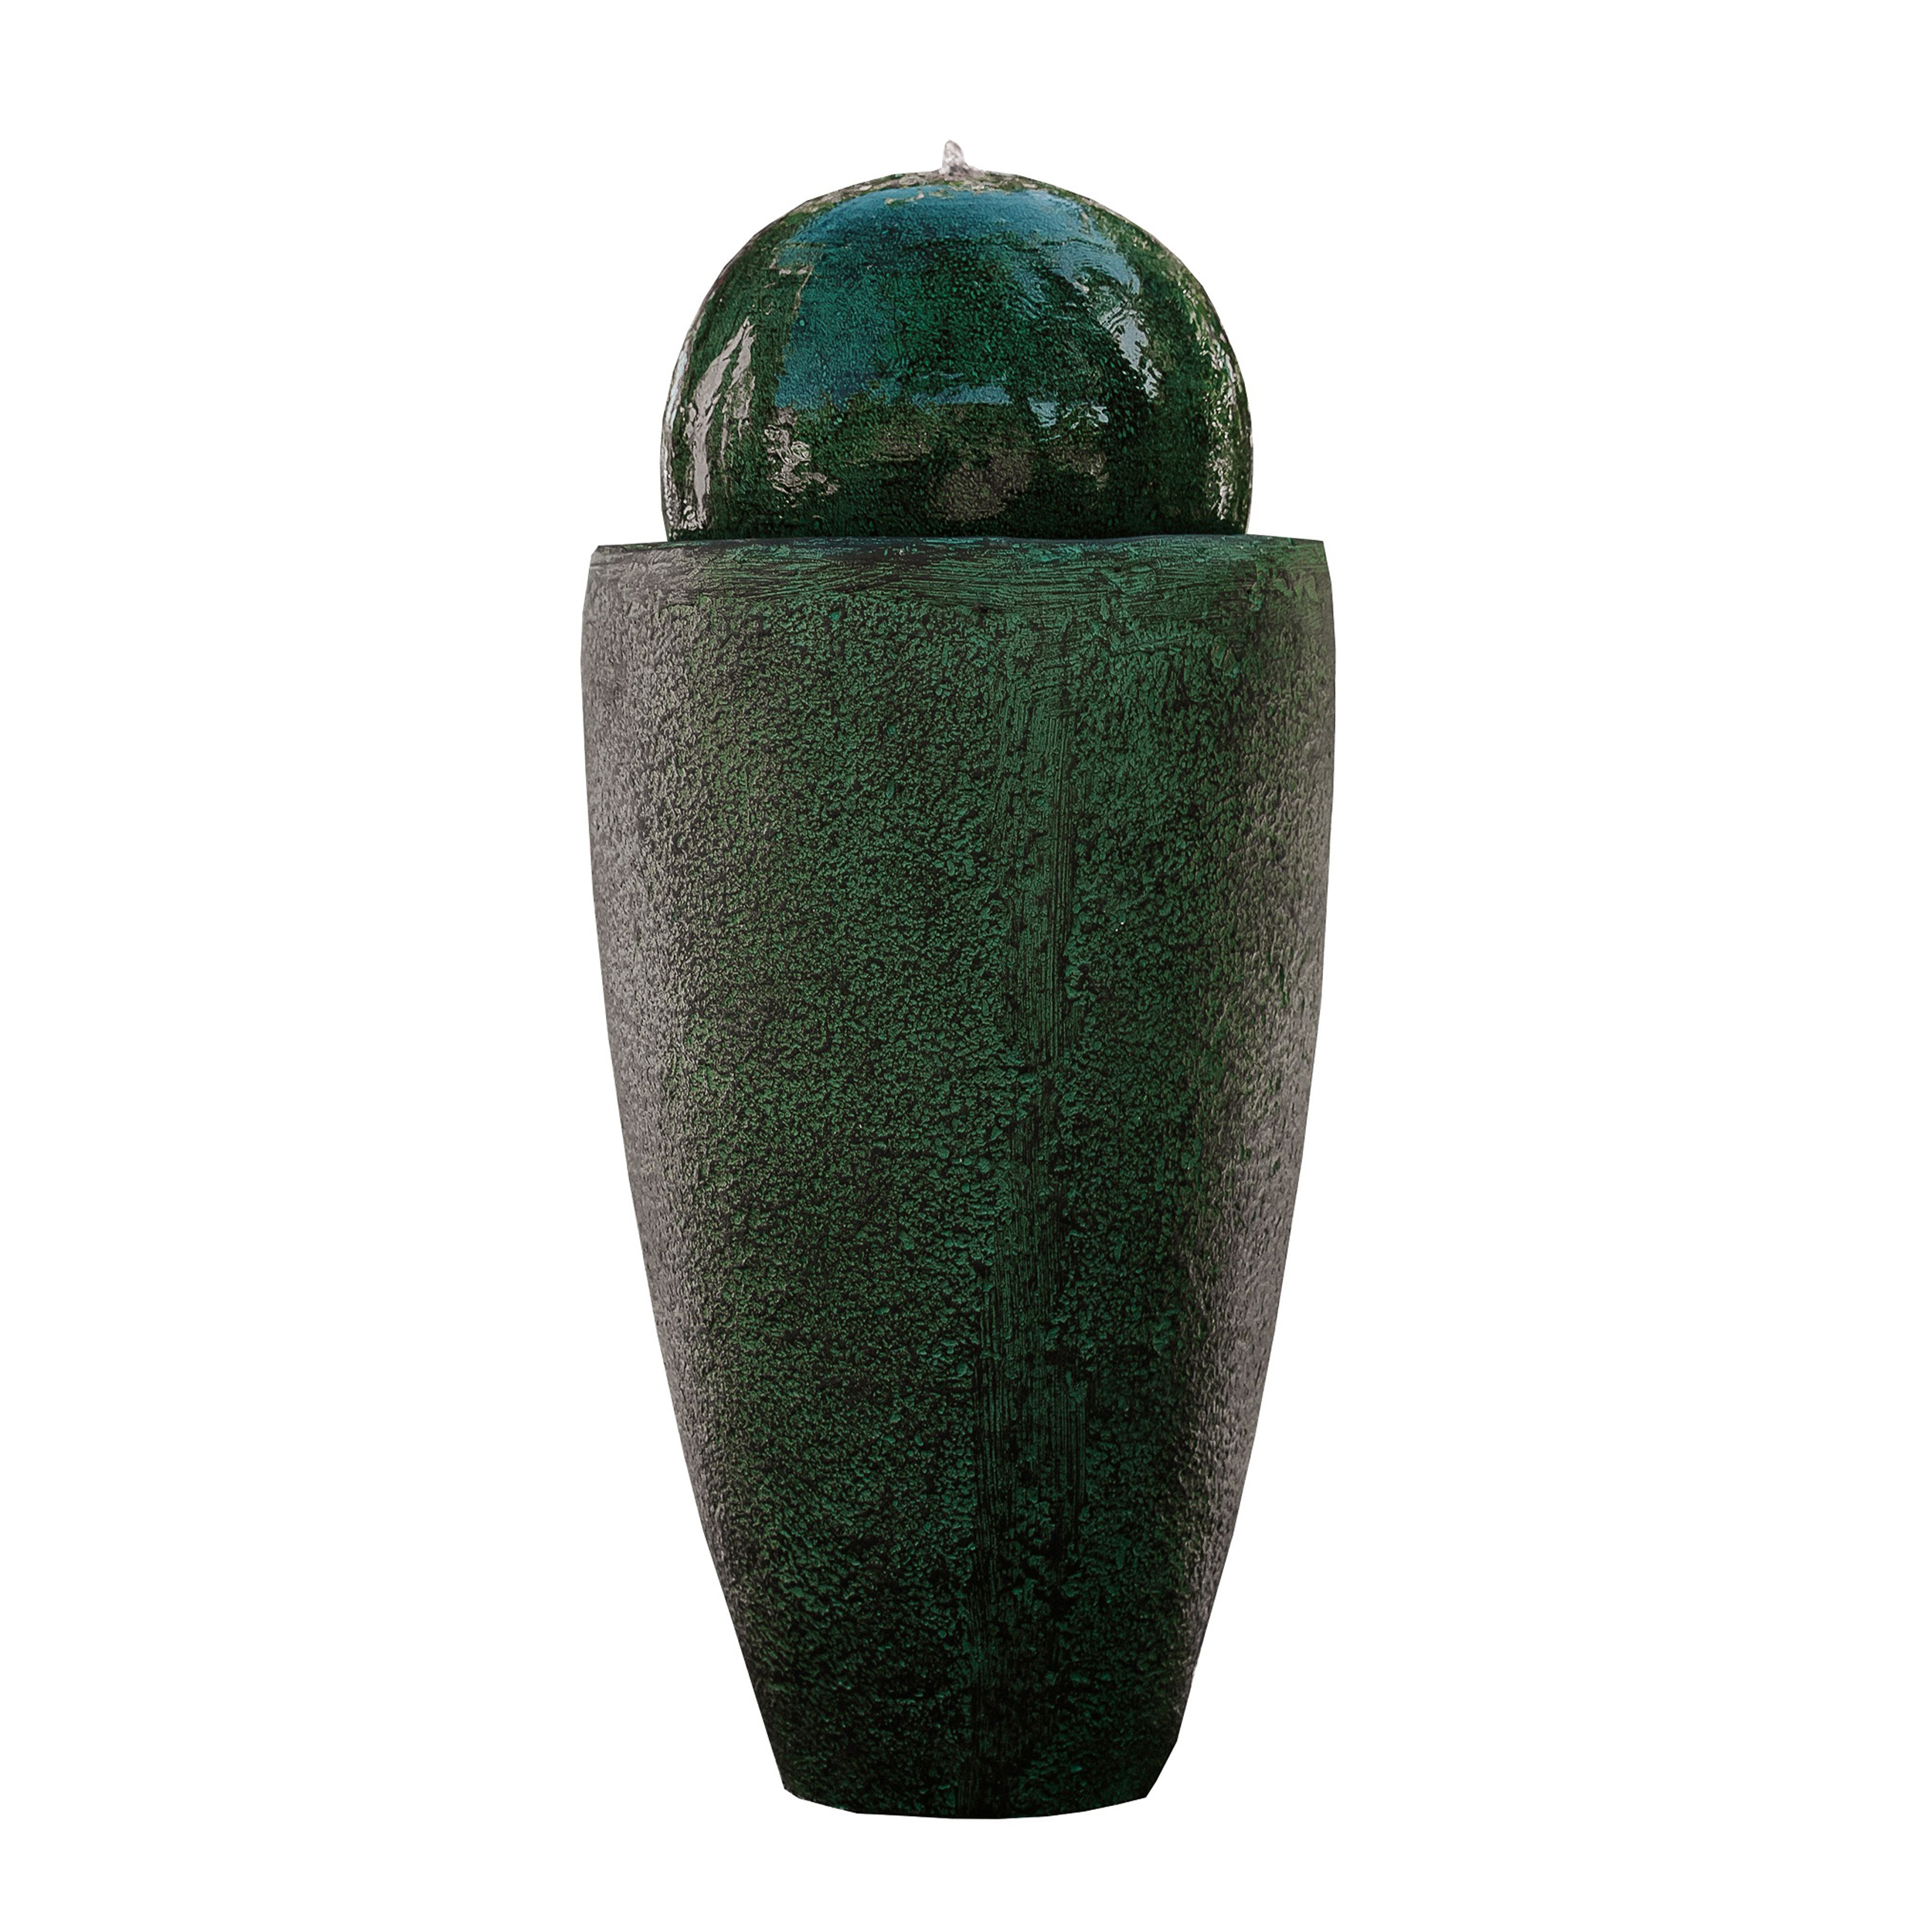 Shop our modern green fountains - round, sphere & tall outdoor designs. Enhance indoor/outdoor décor with water features & elevate your garden décor.